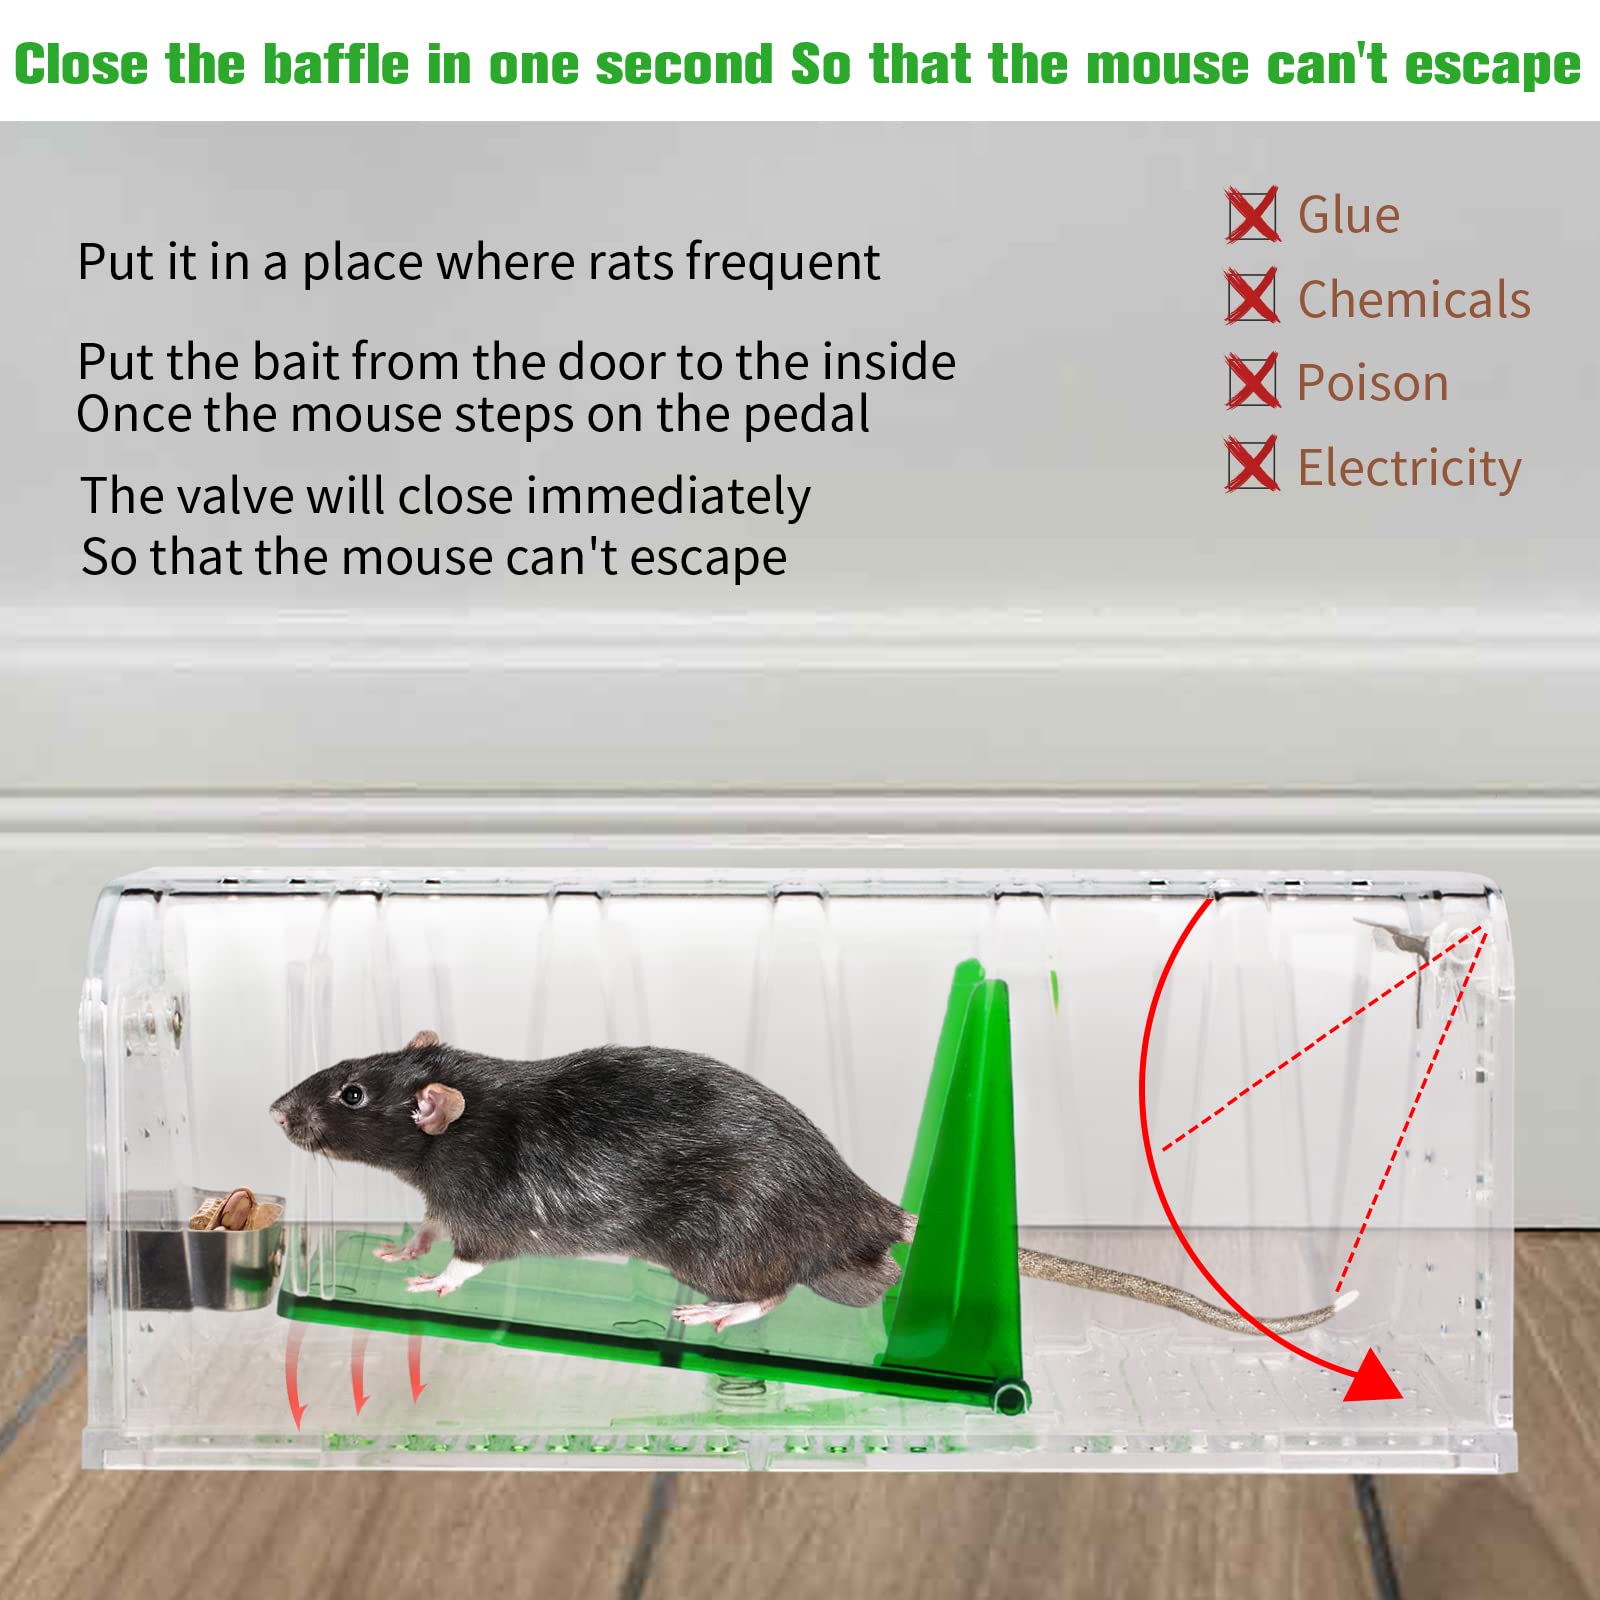 Heyouou Humane Mouse Traps Indoor Outdoor, Reusable Rat Catch and Release That Work, No Kill Live Safe Mice Trap Catcher for House, Garage, Small Rodent, Voles, Hamsters, Mole 2 pack Blue Mouse Traps